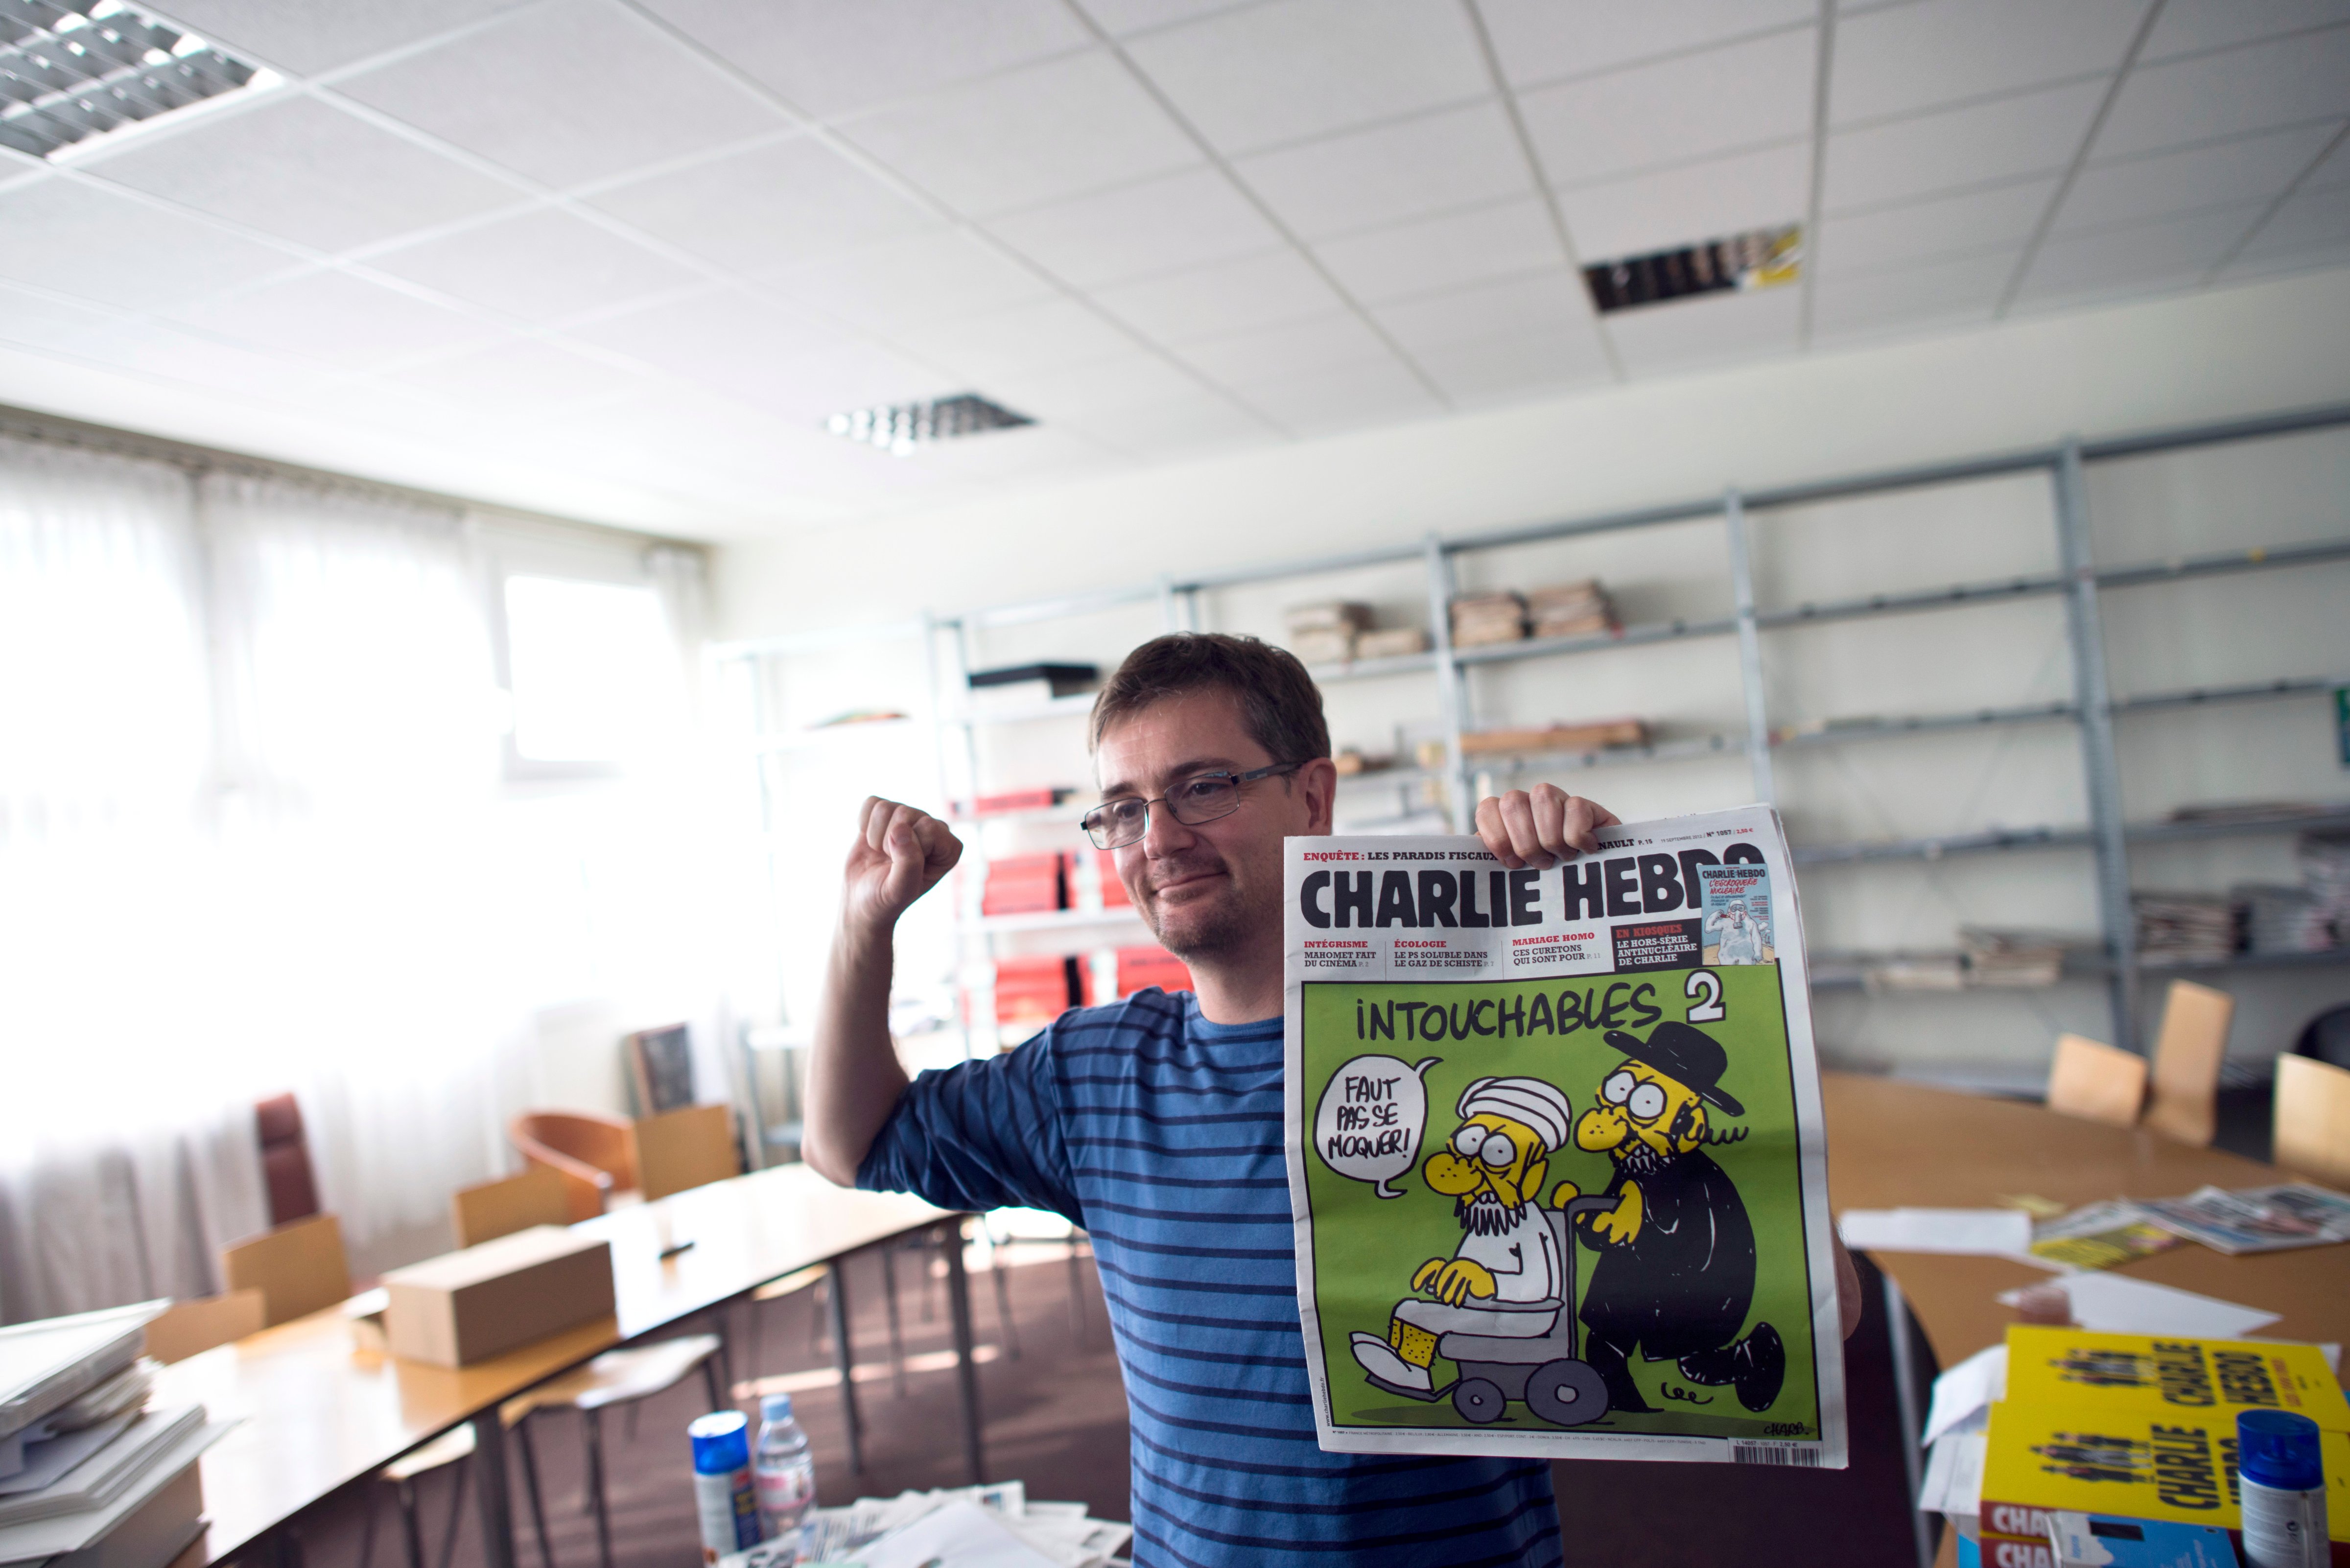 French satirical weekly <i>Charlie Hebdo</i>'s editor and cartoonist St&eacute;phane Charbonnier clenches his fist as he presents to journalists, on Sept. 19, 2012, at the weekly's headquarters in Paris, the latest issue that features on the front cover a satirical drawing entitled "Intouchables 2." Inside pages contain several cartoons of the Prophet Muhammad (Fred Dufour&mdash;AFP/Getty Images)